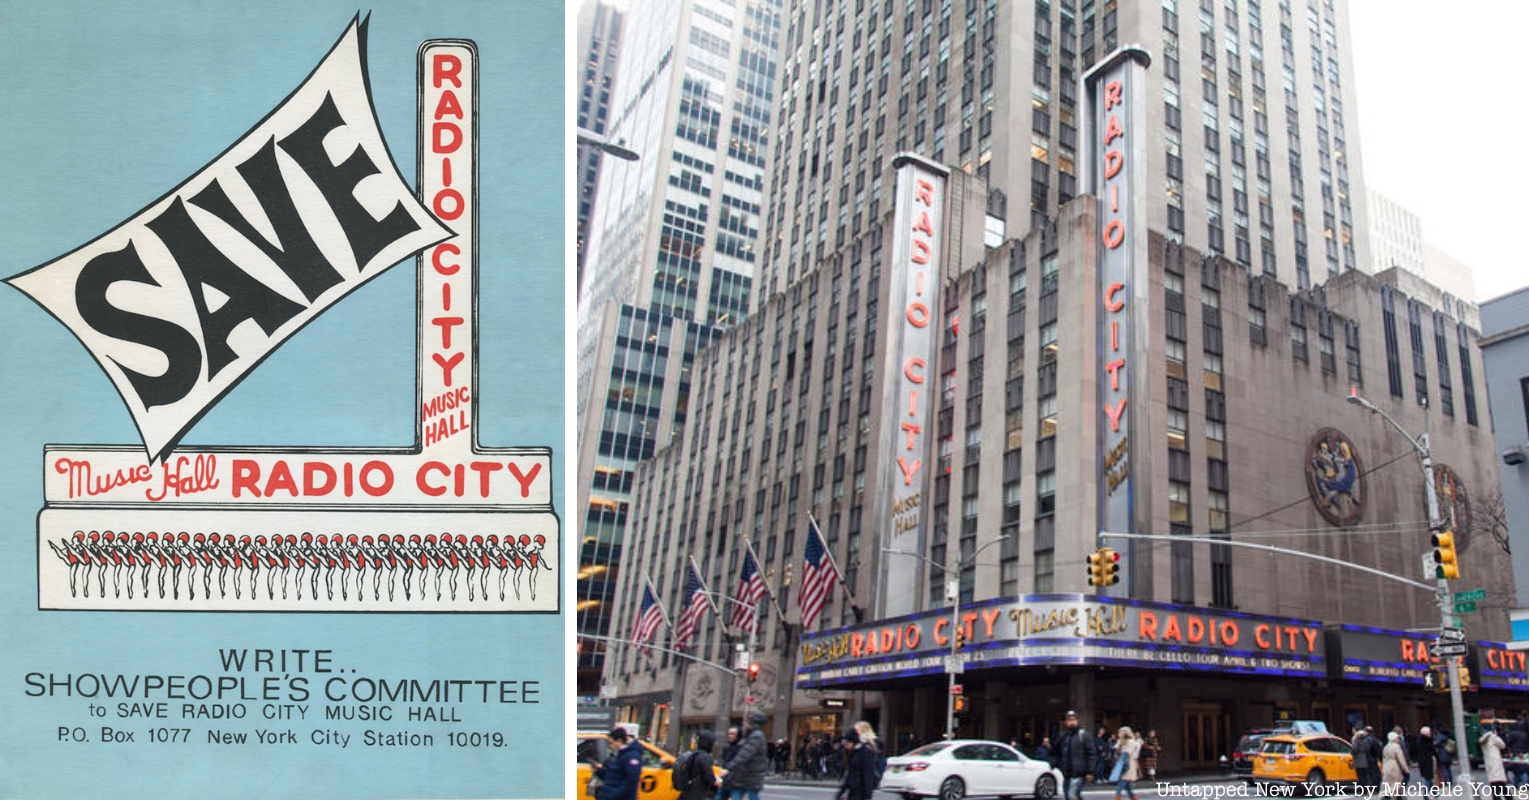 Radio City Music Hall and a poster for the Showpeople's Committee to save Radio City from demolition